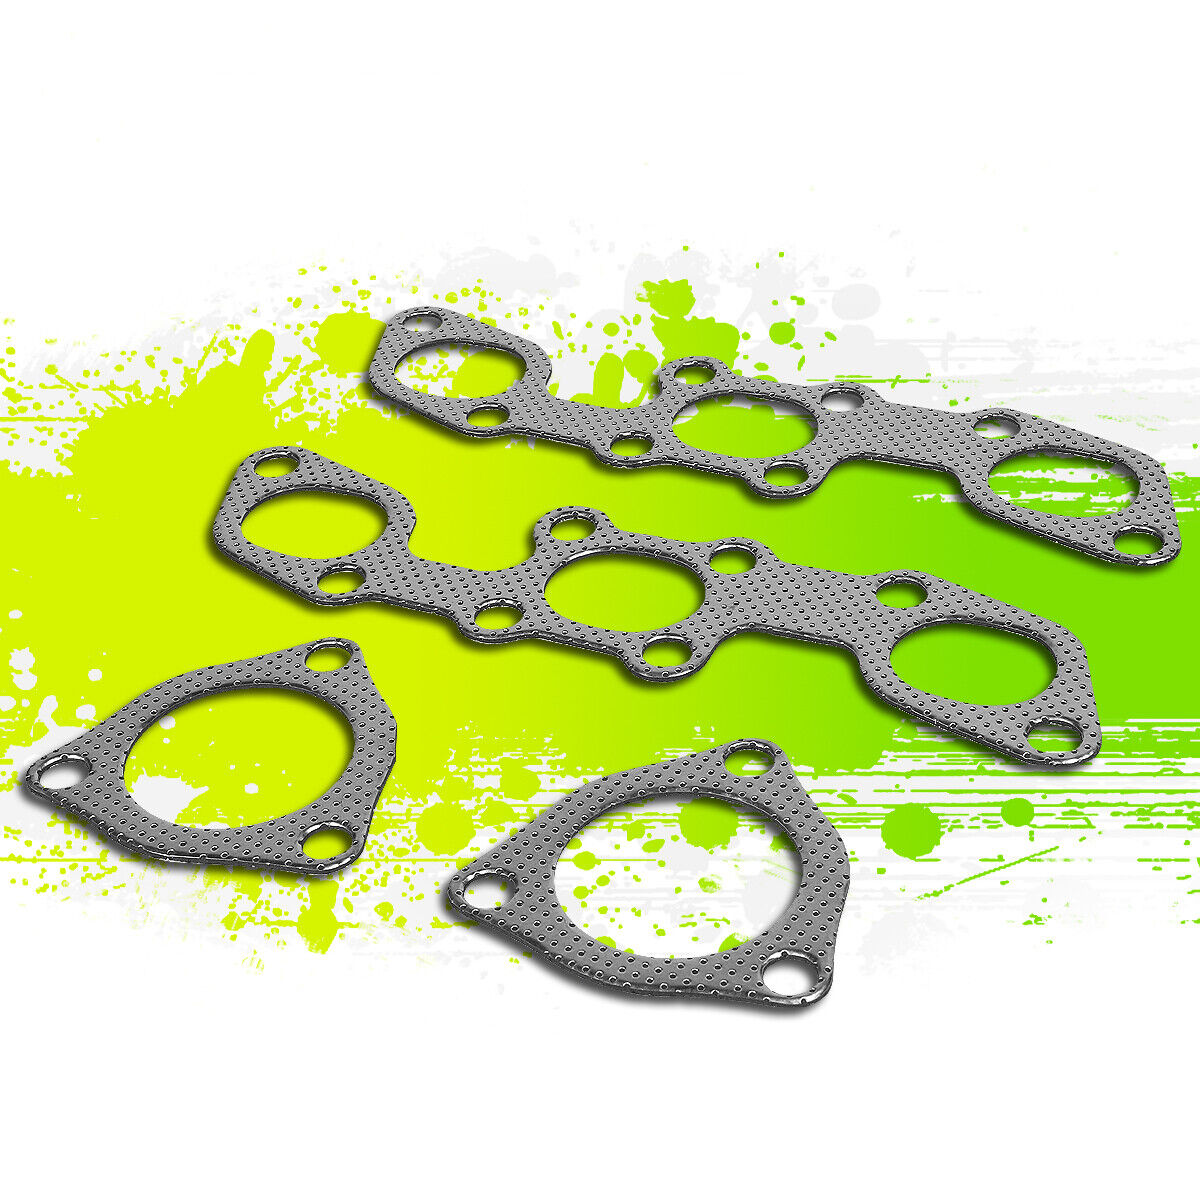 FOR 90-96 NISSAN 300ZX 3.0 NON TURBO EXHAUST MANIFOLD HEADER GASKET 92 93 94 95